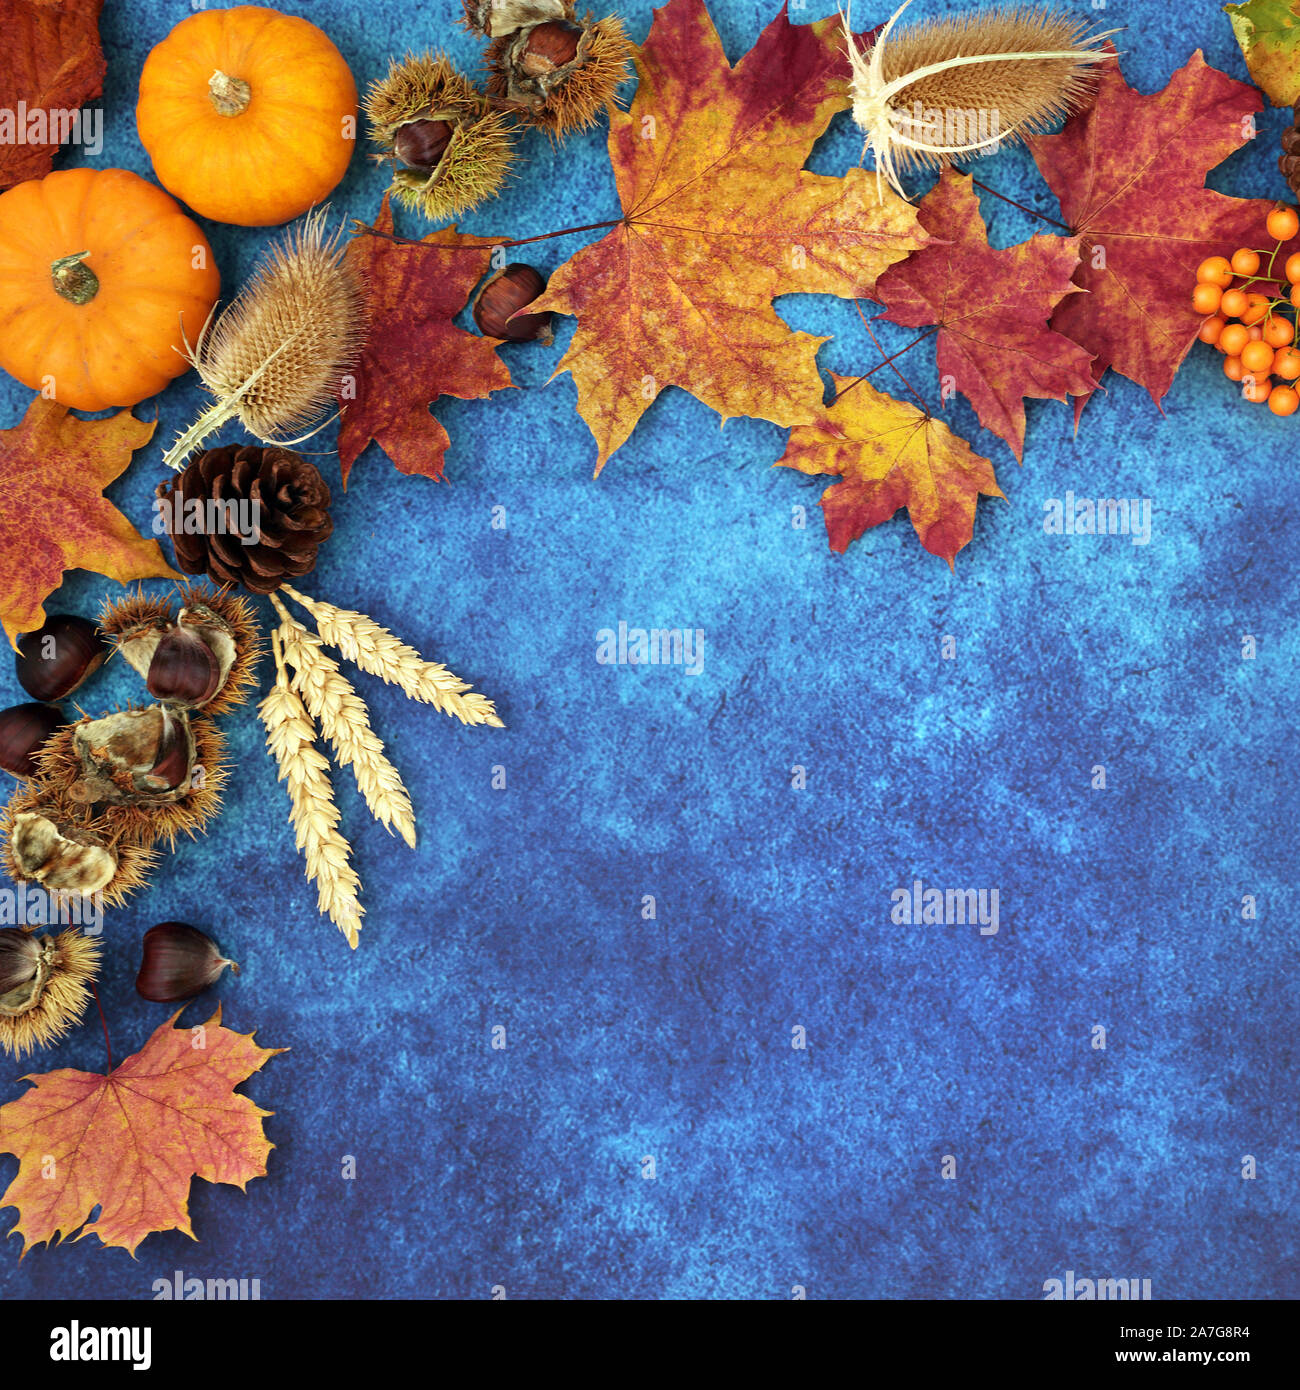 Autumn background border with food, flora and fauna on mottled blue background. Top view. Harvest festival or Halloween theme. Stock Photo